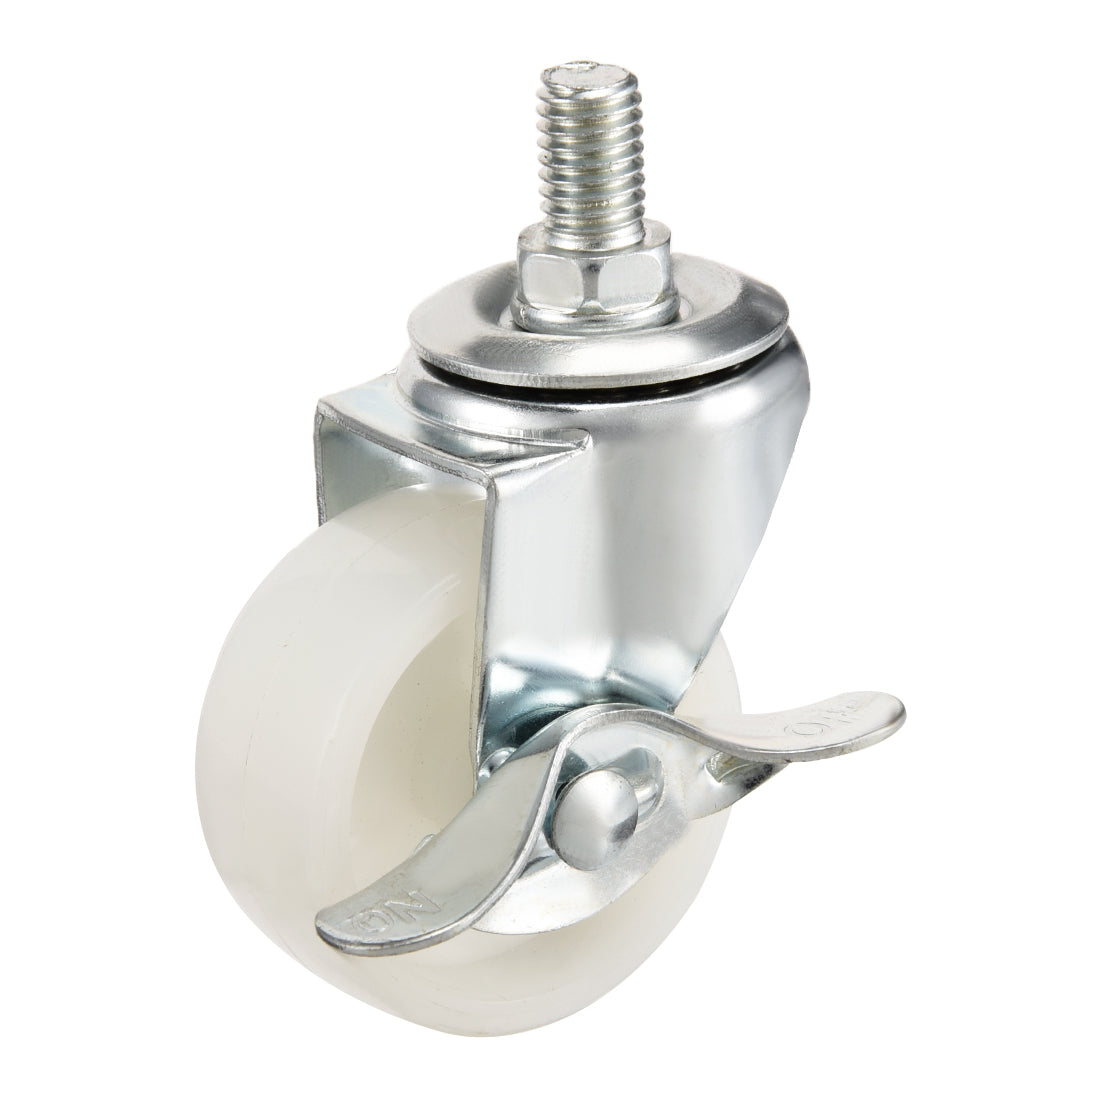 Uxcell Uxcell Swivel Casters 1.5 Inch Nylon 360 Degree M8 x 15mm Threaded Caster Wheels with Brake White 44lb Capacity 2 Pcs